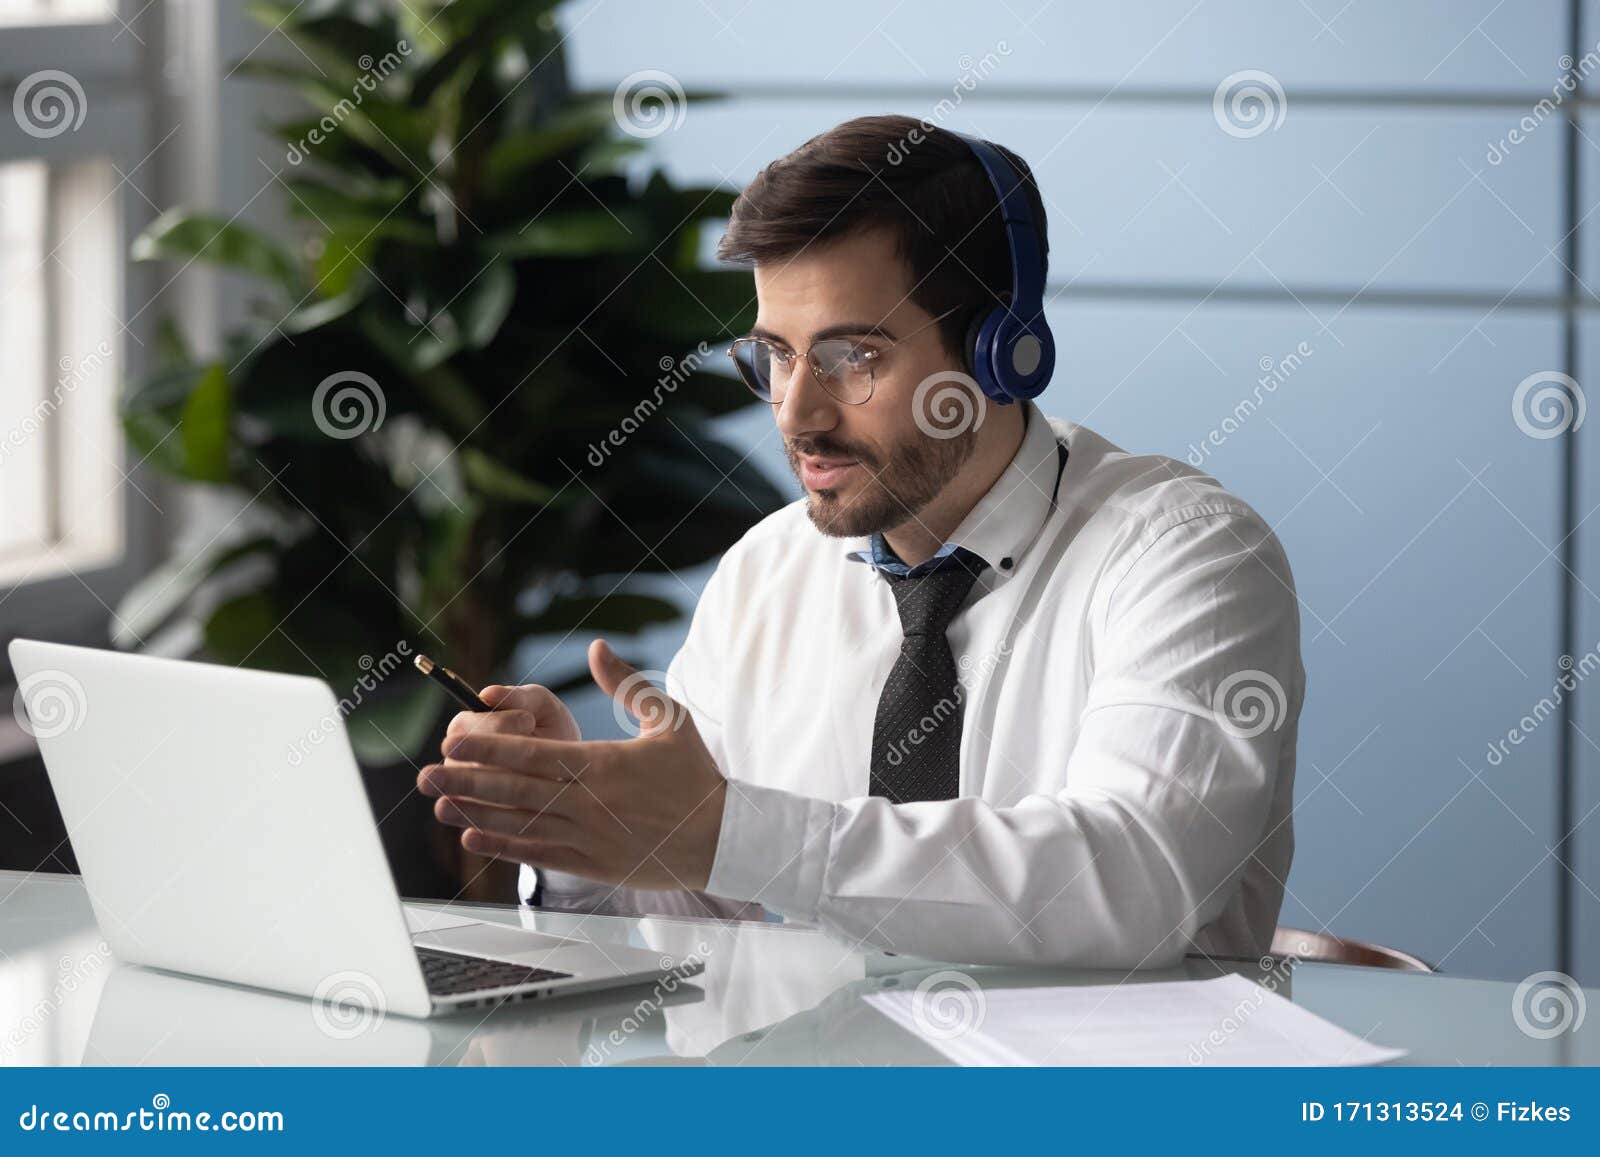 businessman in headphones makes videocall chatting with partner consulting client